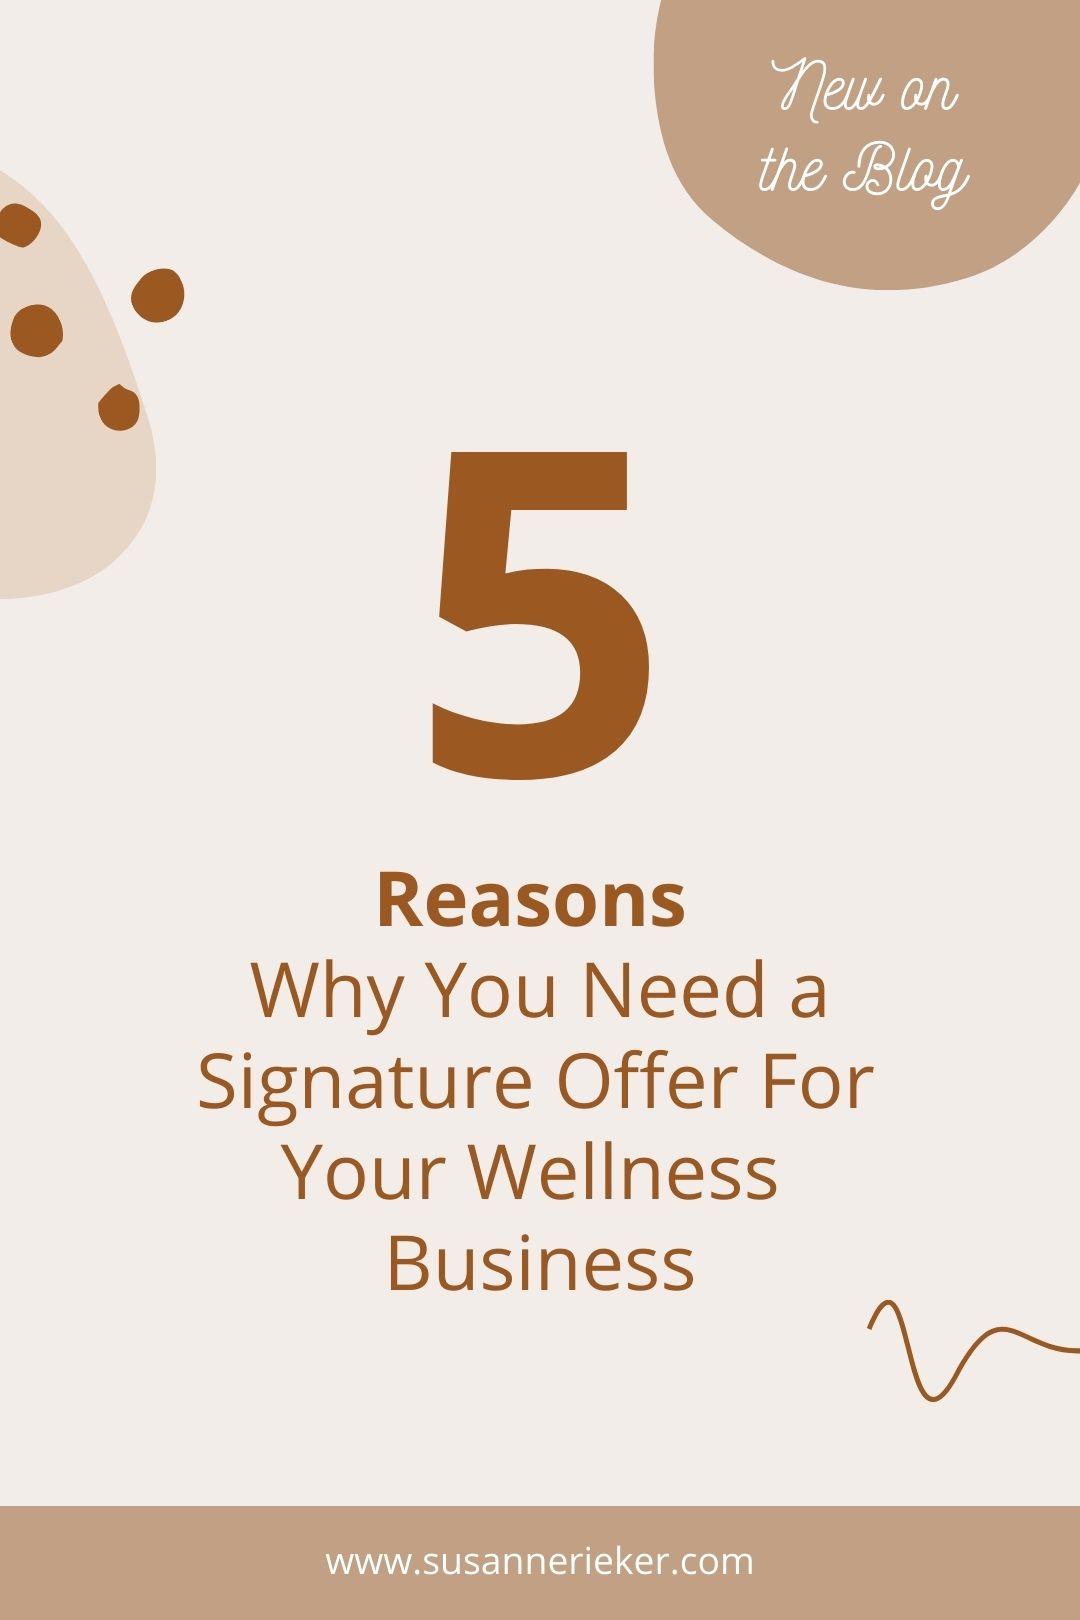 5 Reasons Why You Need a Signature Offer For Your Wellness Business